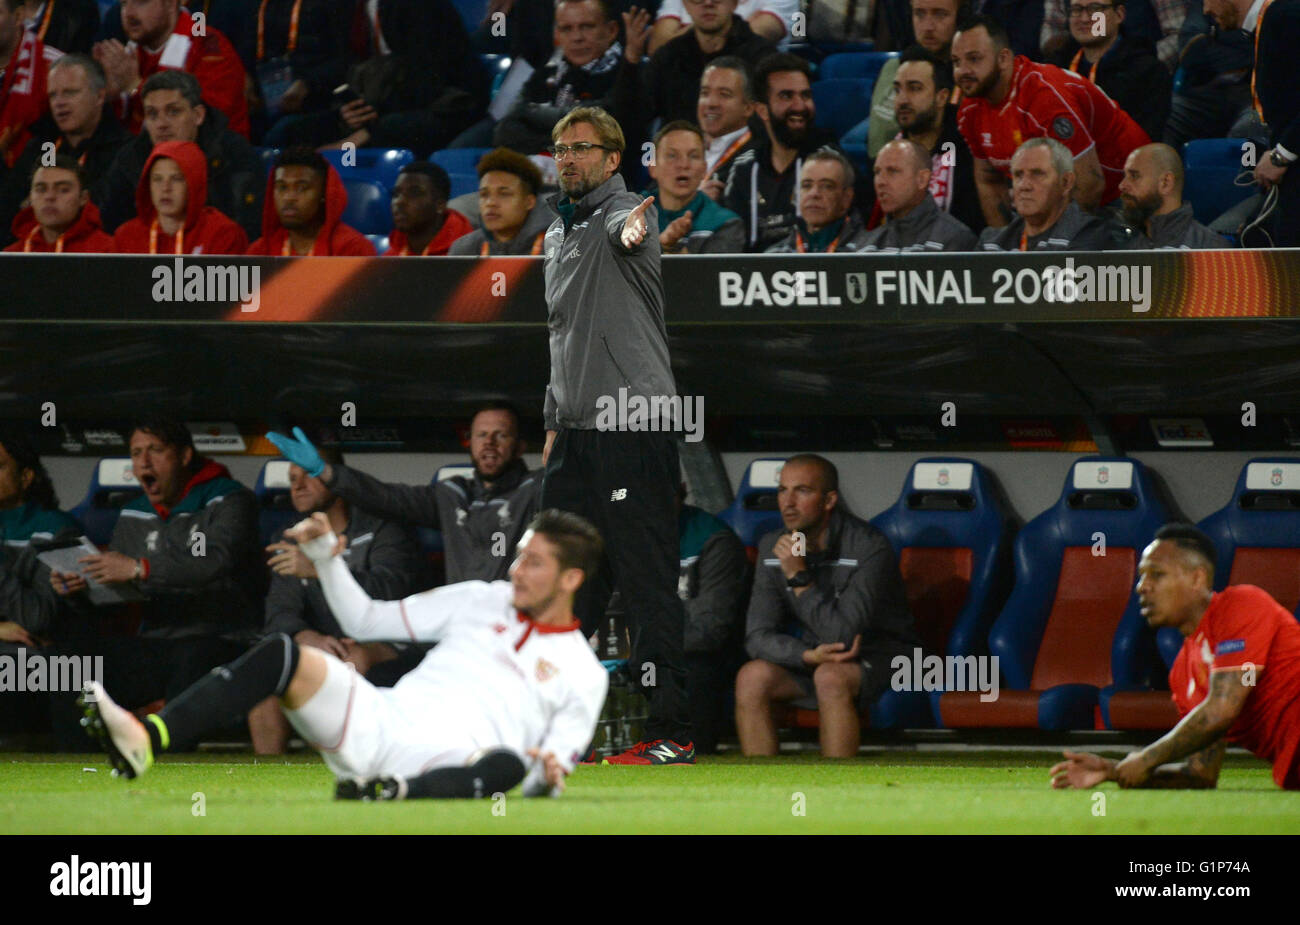 Basel, Switzerland. 18th May, 2016.   Liverpool's coach Juergen Klopp gestures during the UEFA Europa League final between Liverpool FC and Sevilla Futbol Club at the St. Jakob-Park stadium in Basel, Switzerland, on 18 May 2016. Credit:  dpa picture alliance/Alamy Live News Stock Photo